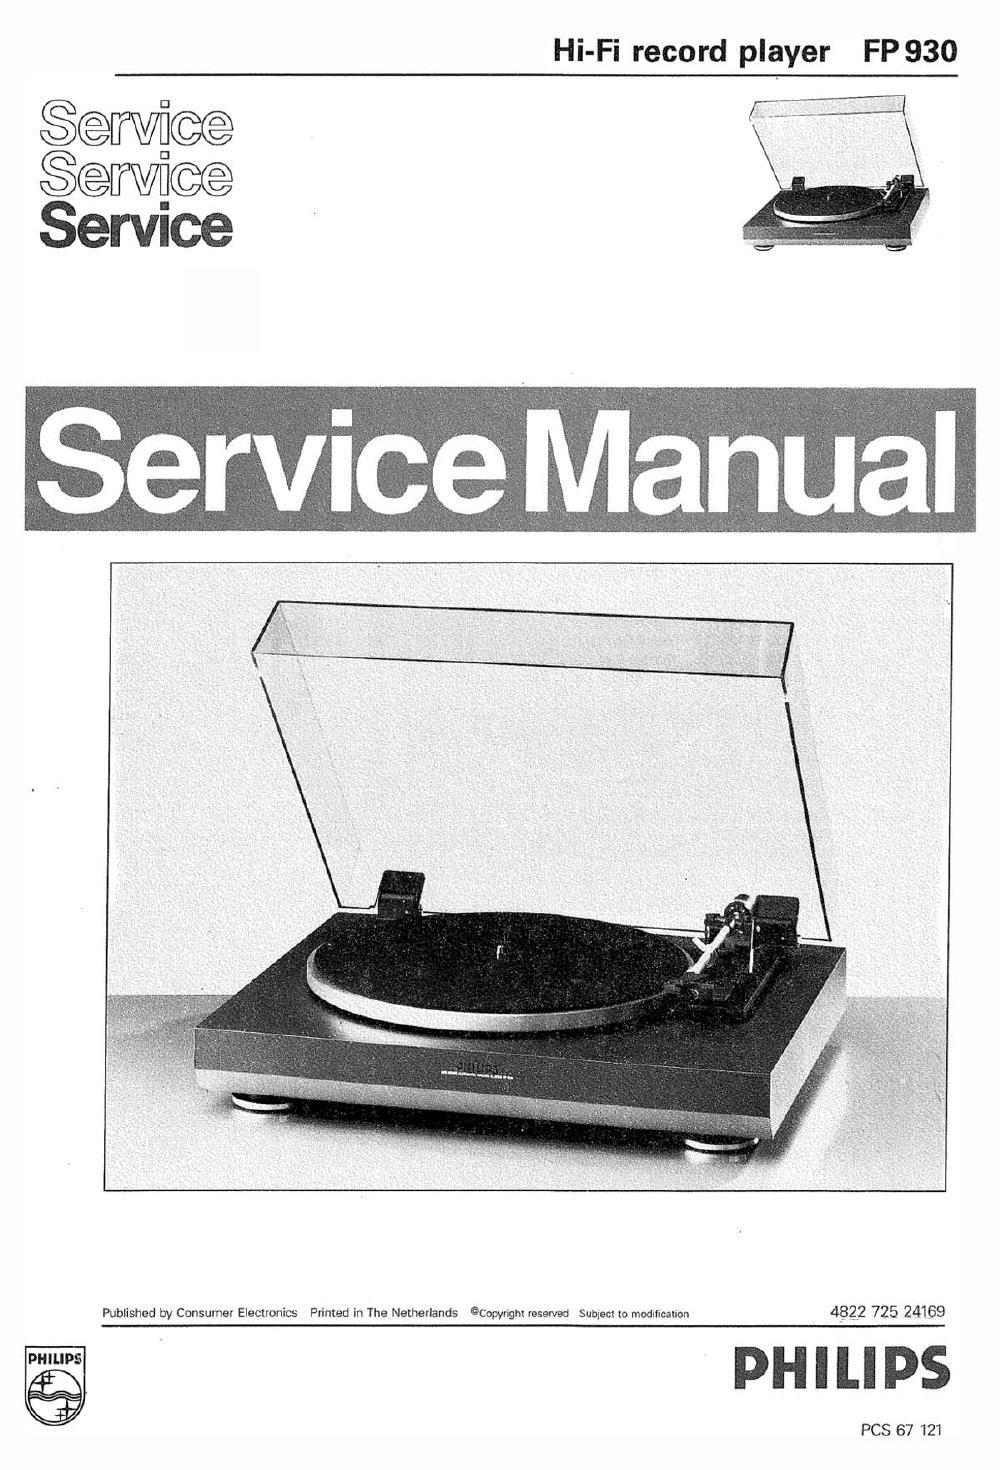 philips fp 930 service manual